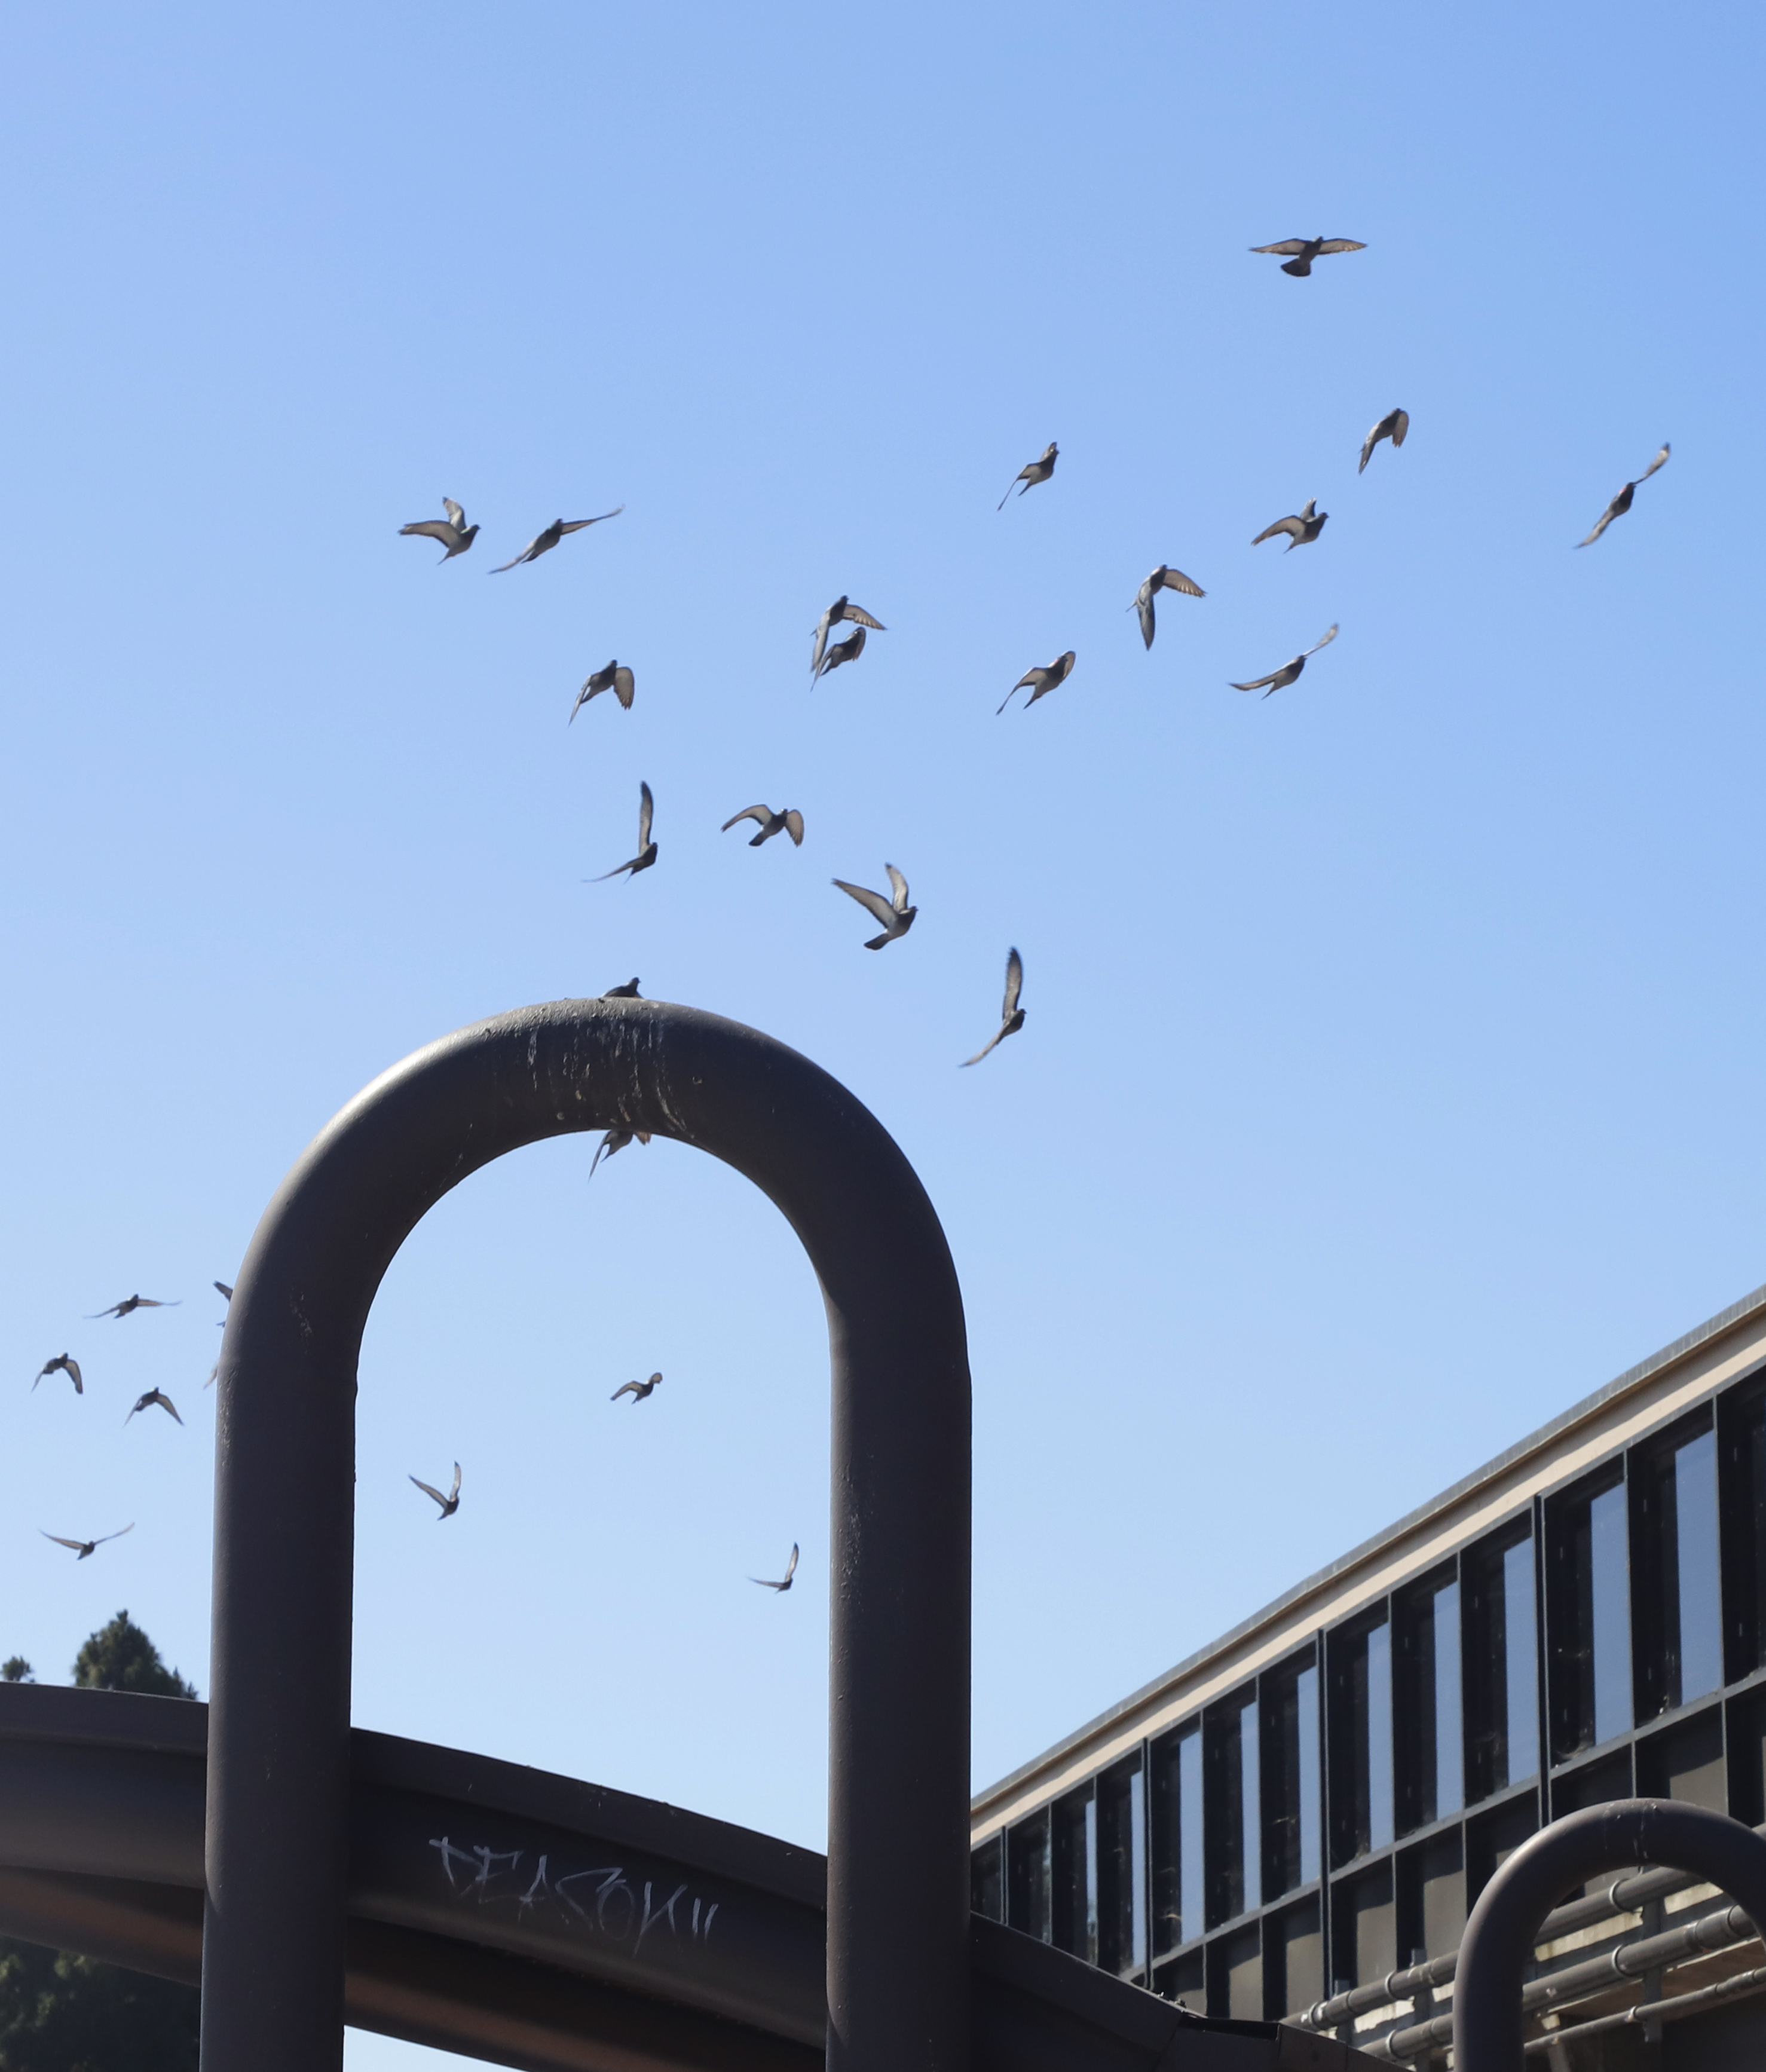 A flock of birds is flying in the clear blue sky above some large, dark metallic structures with an urban setting in the background.